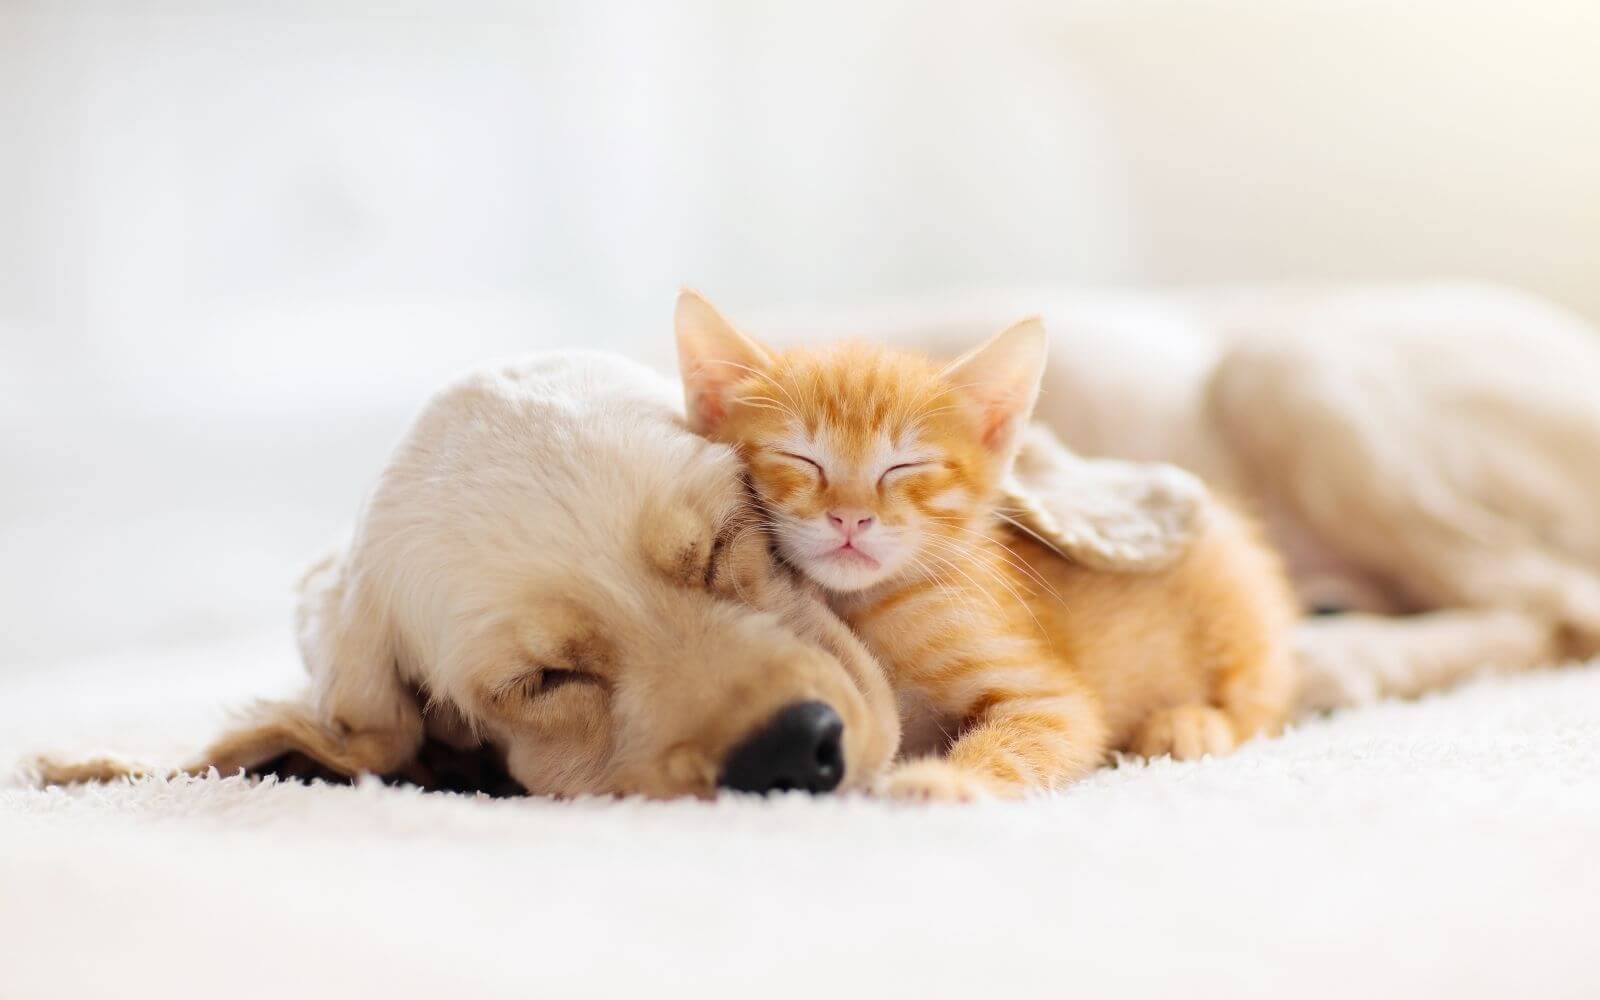 Cute Kitten and Puppy